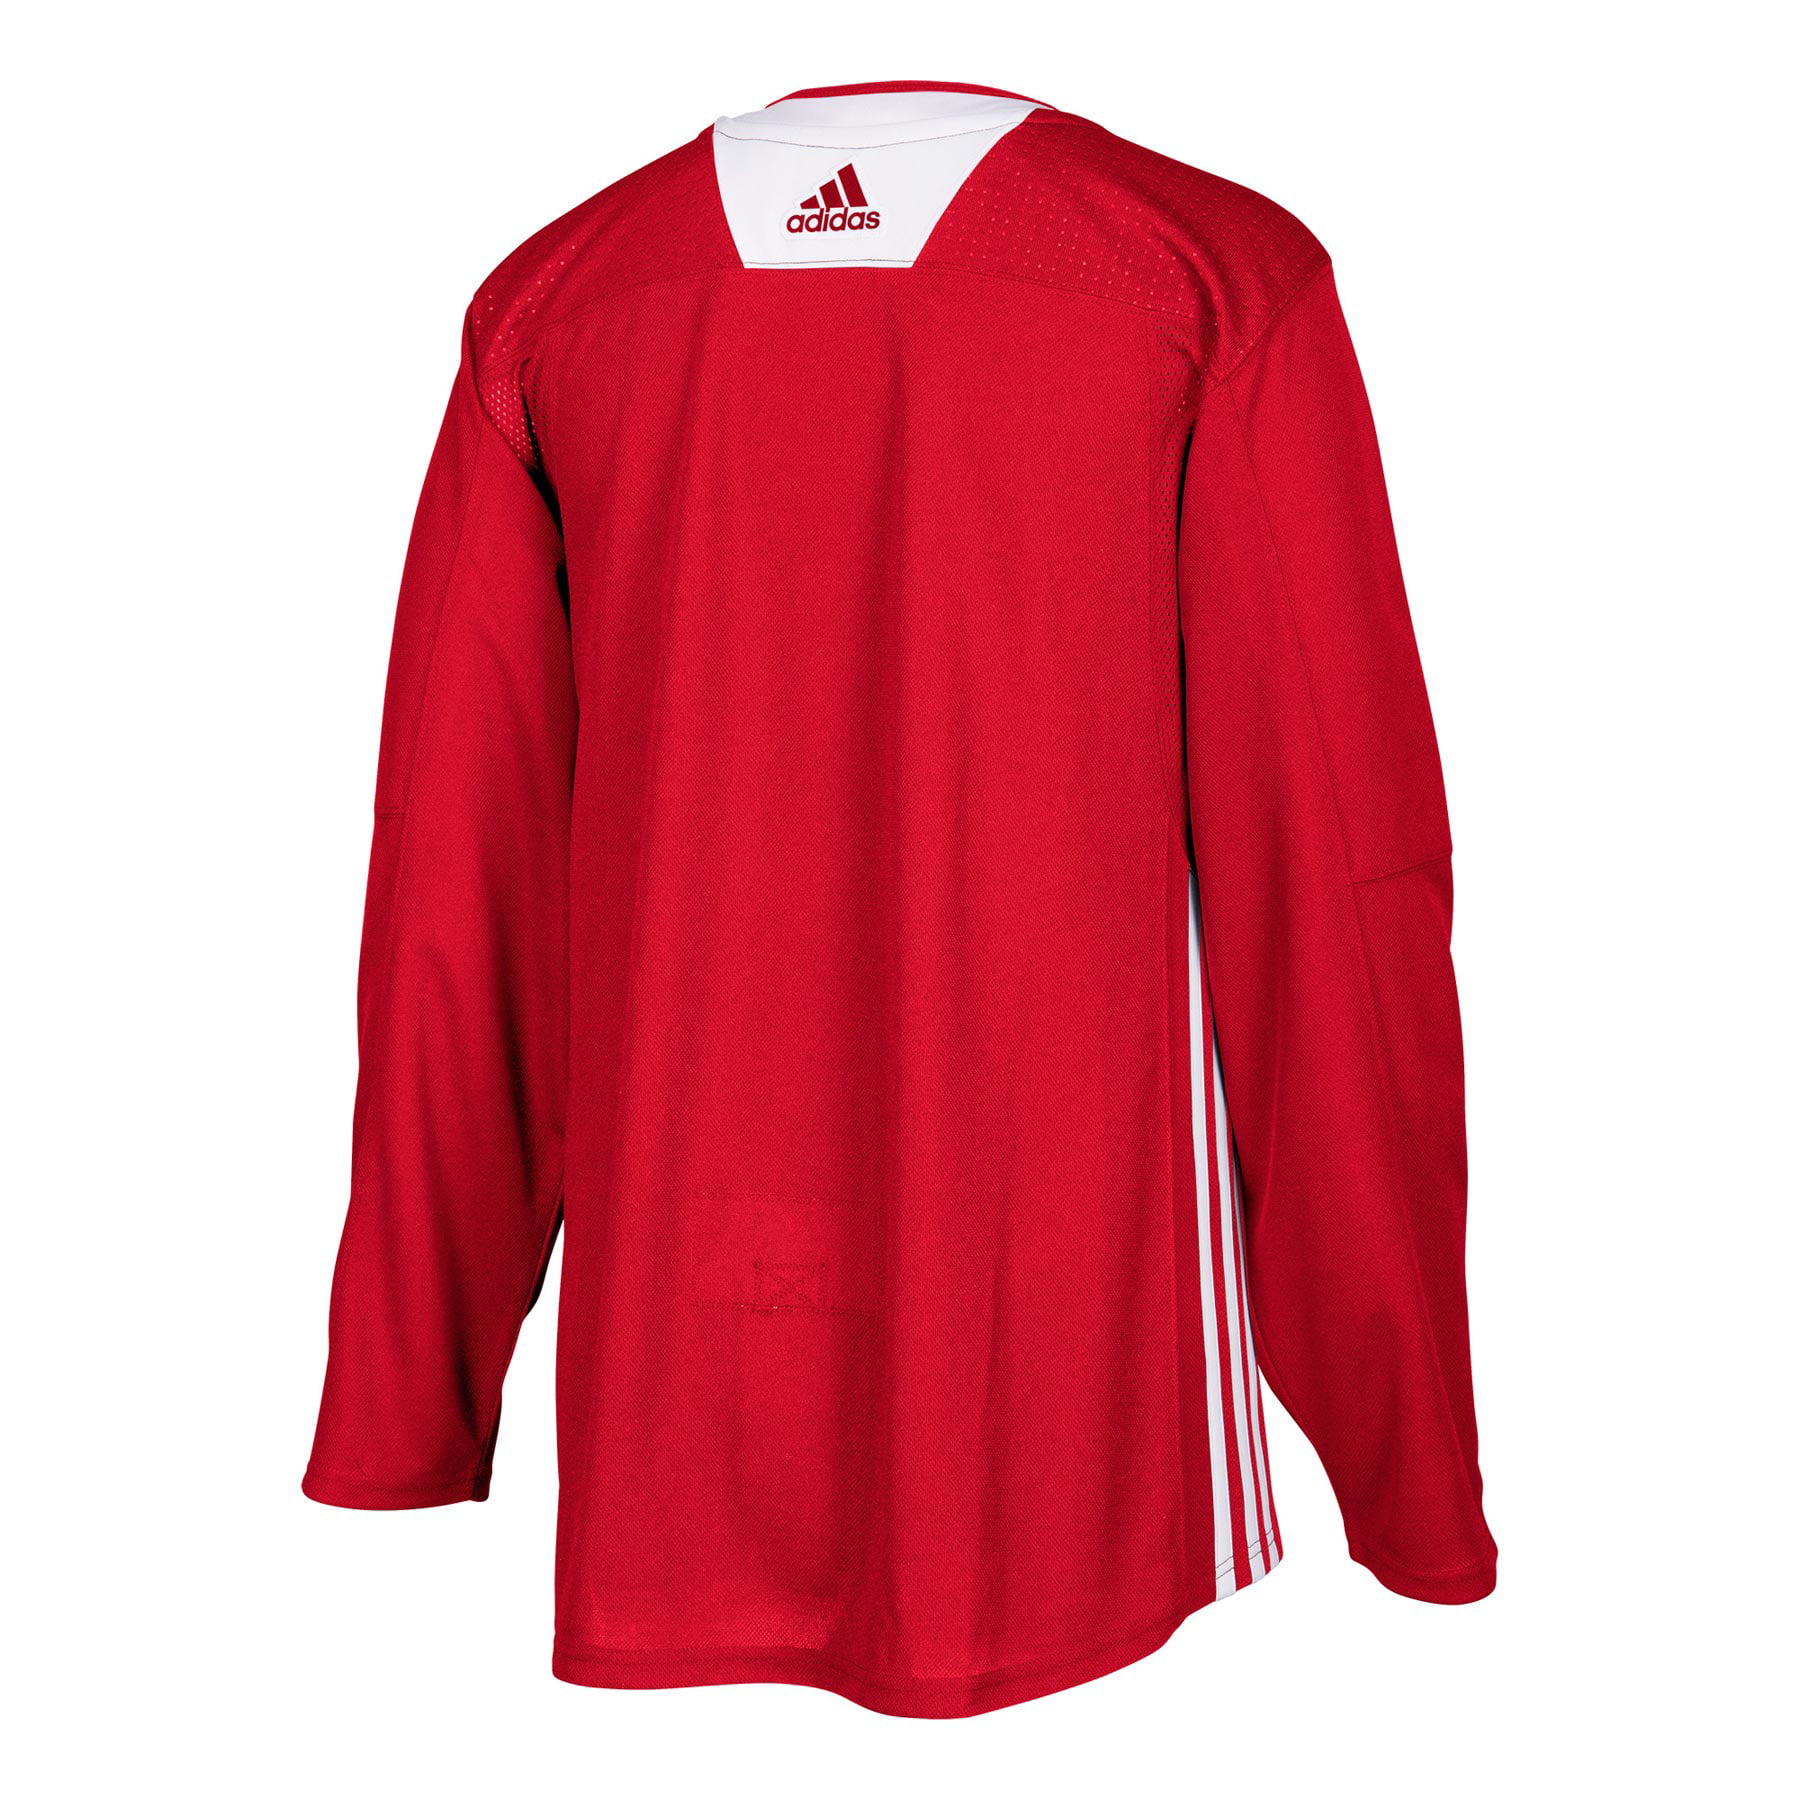 Sports & Outdoors Sports & Fitness adidas 3-Stripe Practice Jersey ...